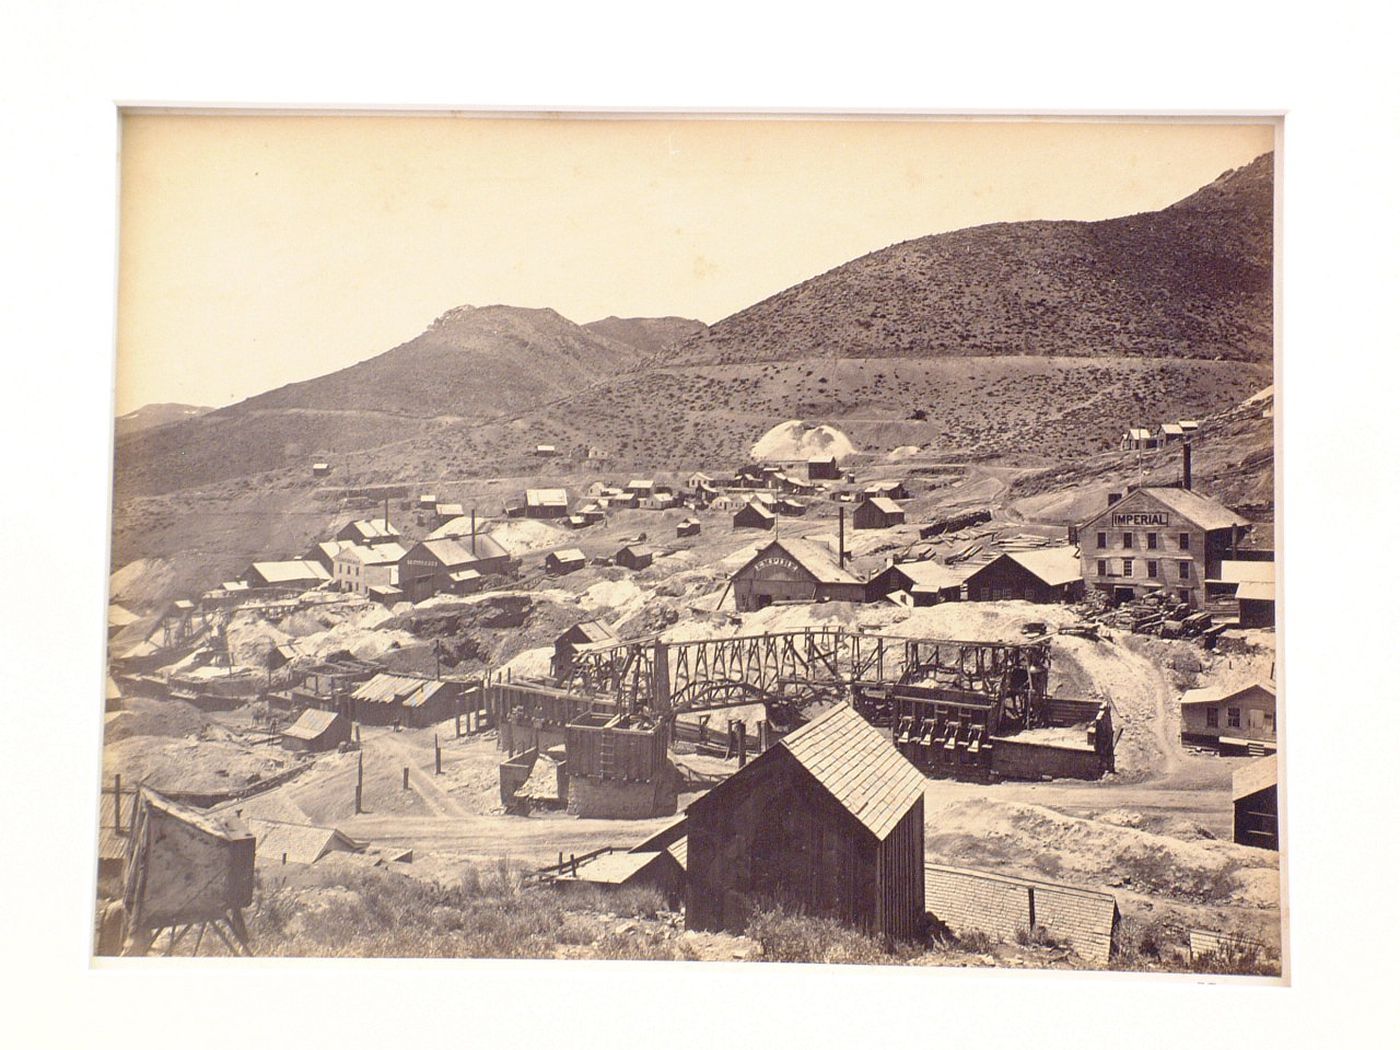 View of the mining camp at Gold Hill, Nevada, United States